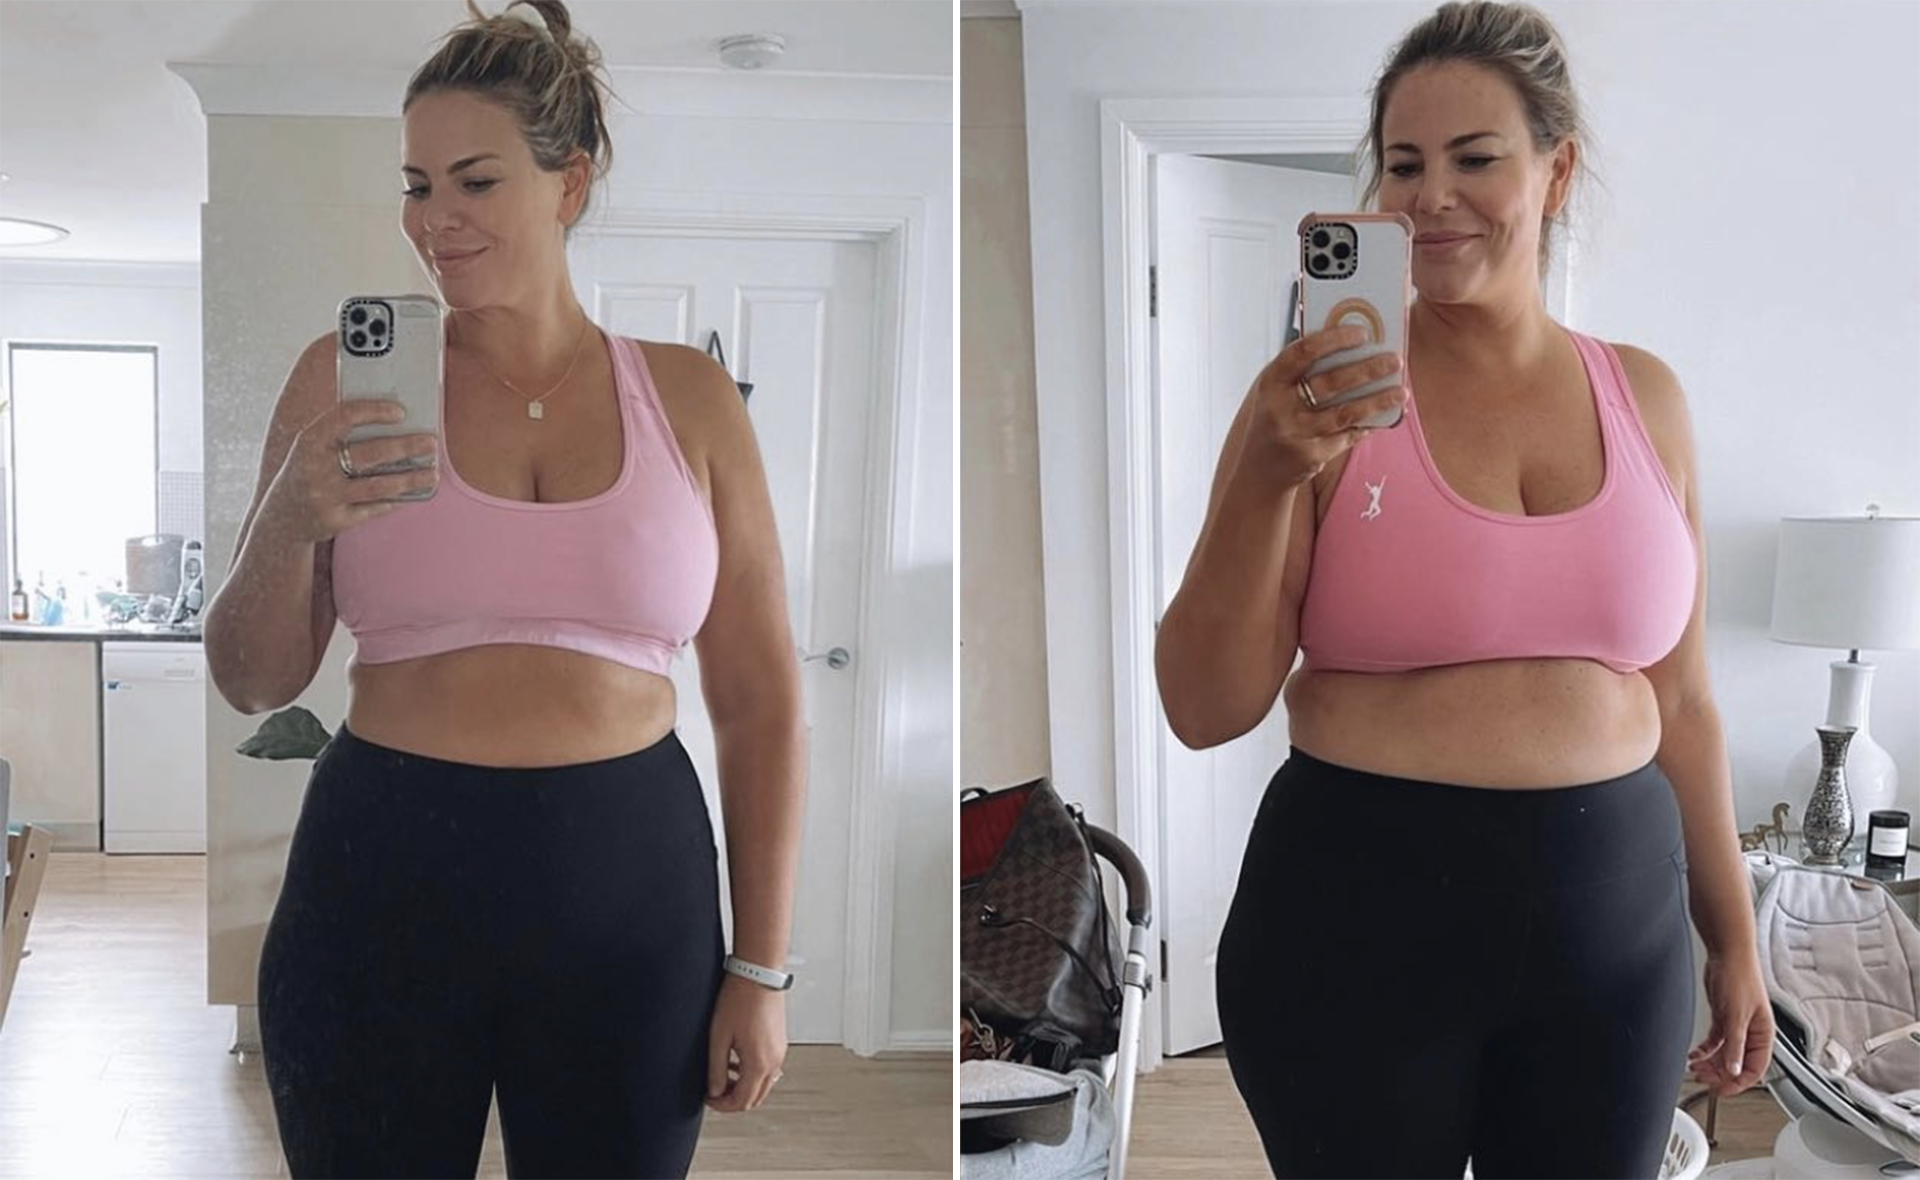 Former Biggest Loser star Fiona Falkiner shows off her incredible weight loss: “These days I’ve been feeling fantastic”